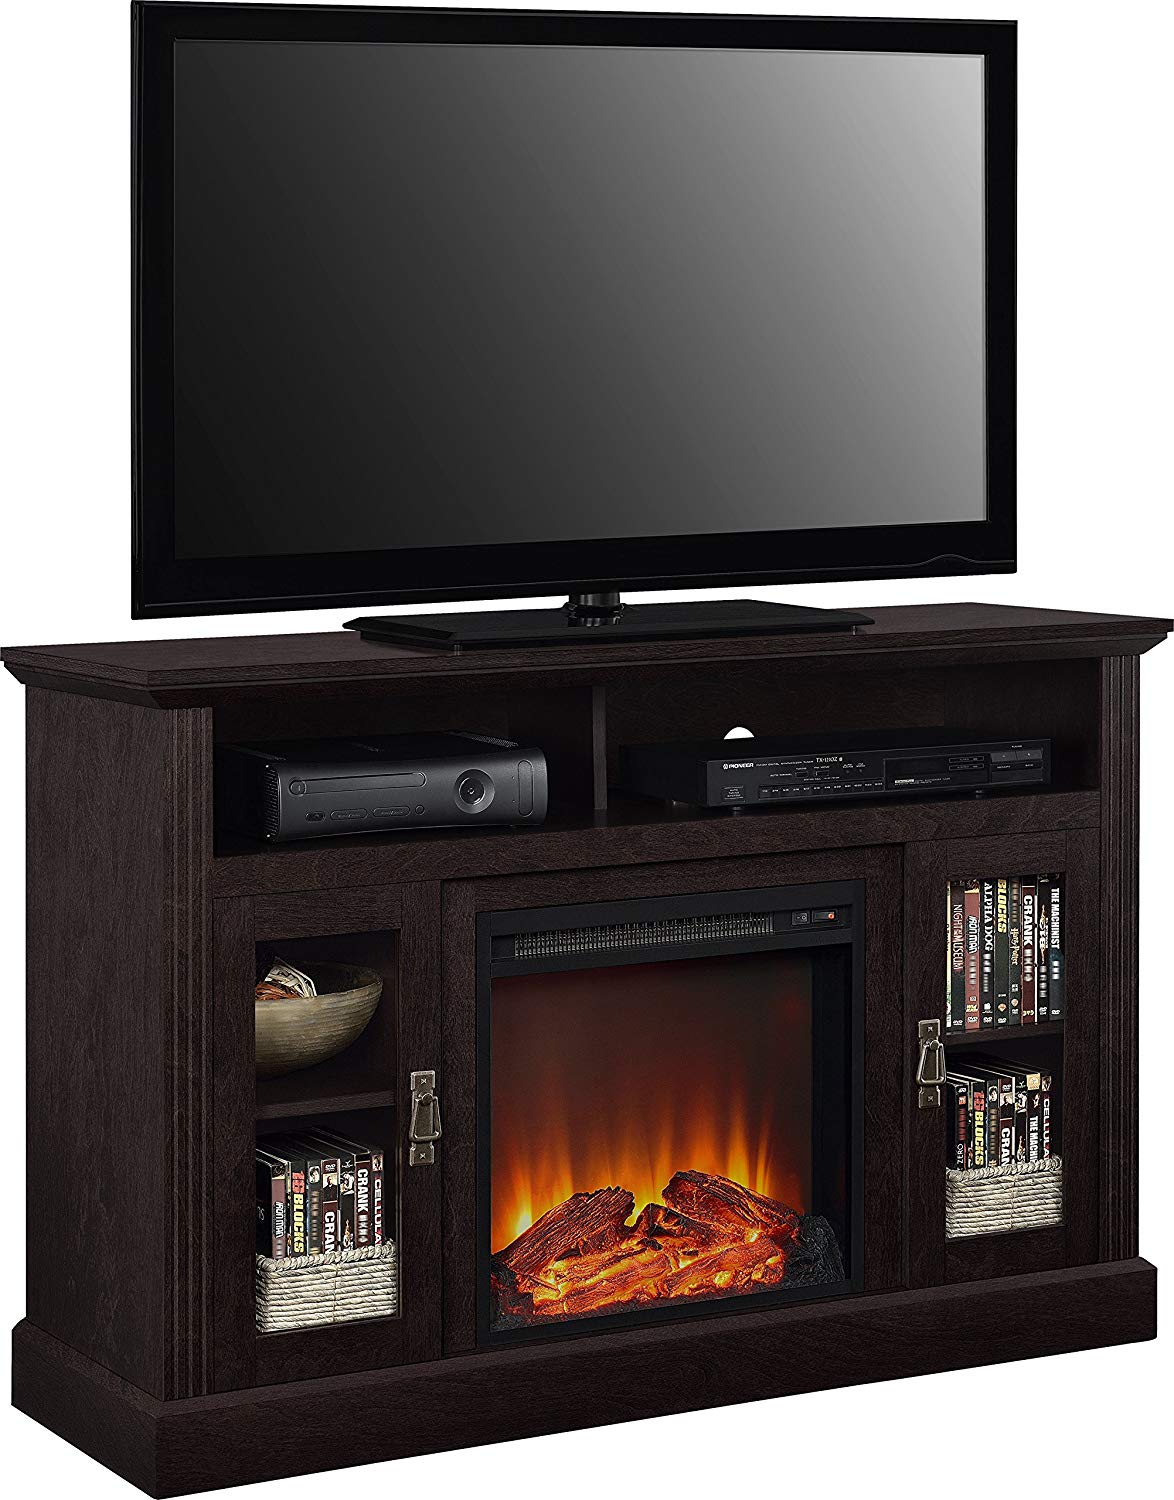 Wall Mount Fireplace Lowes Luxury top 10 Best Lowes Electric Fireplace